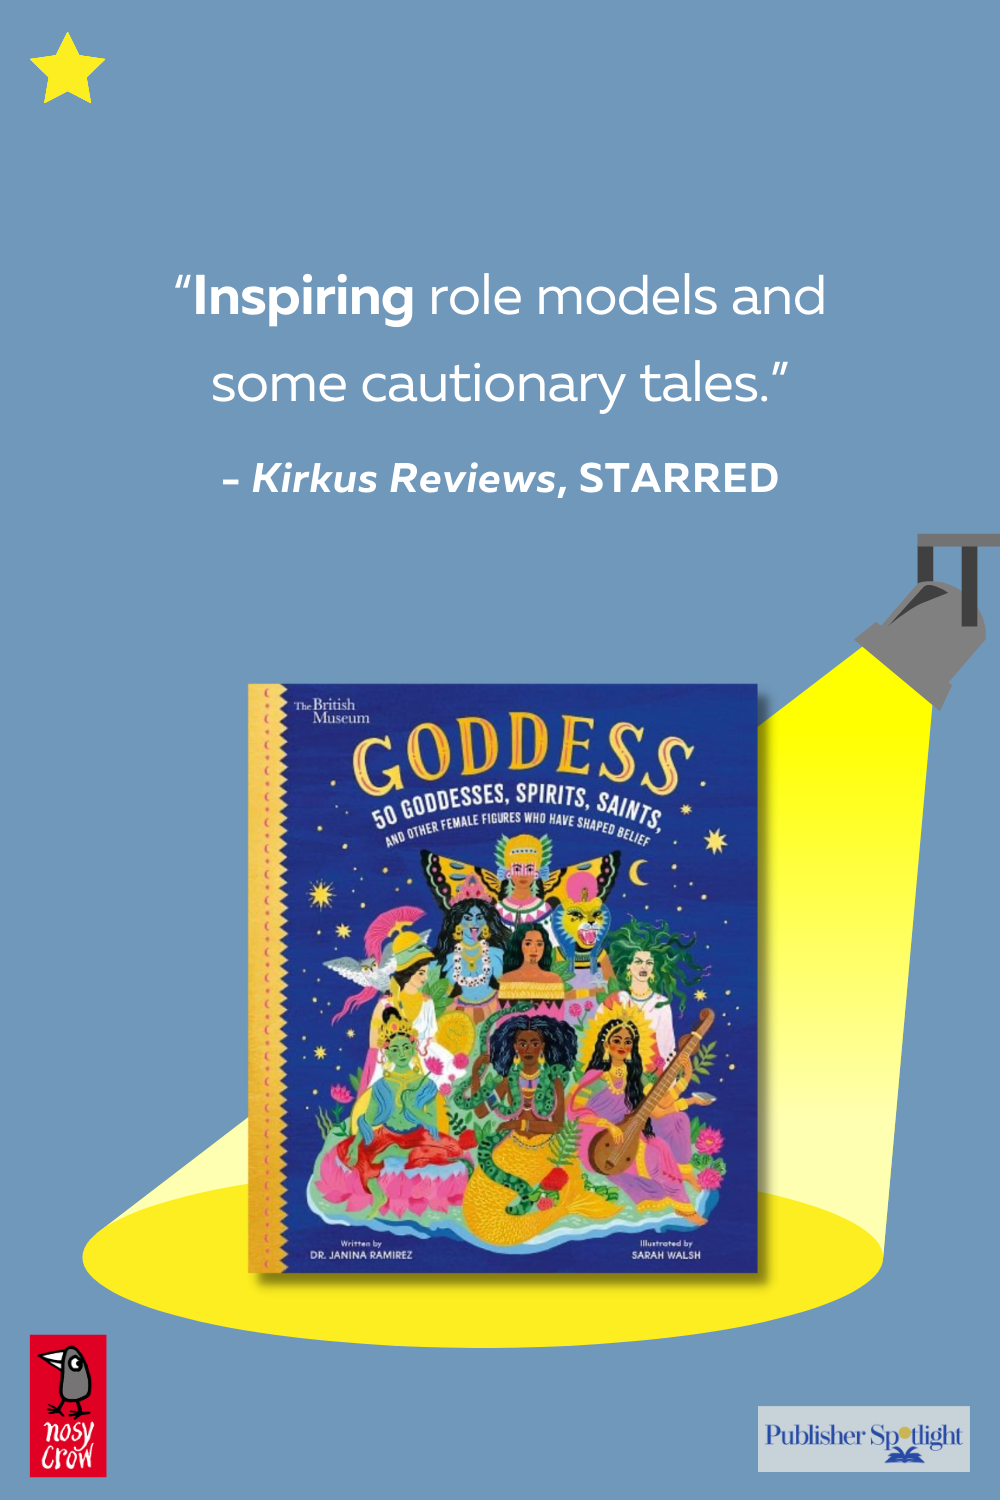 Starred Review Goddess Cover image